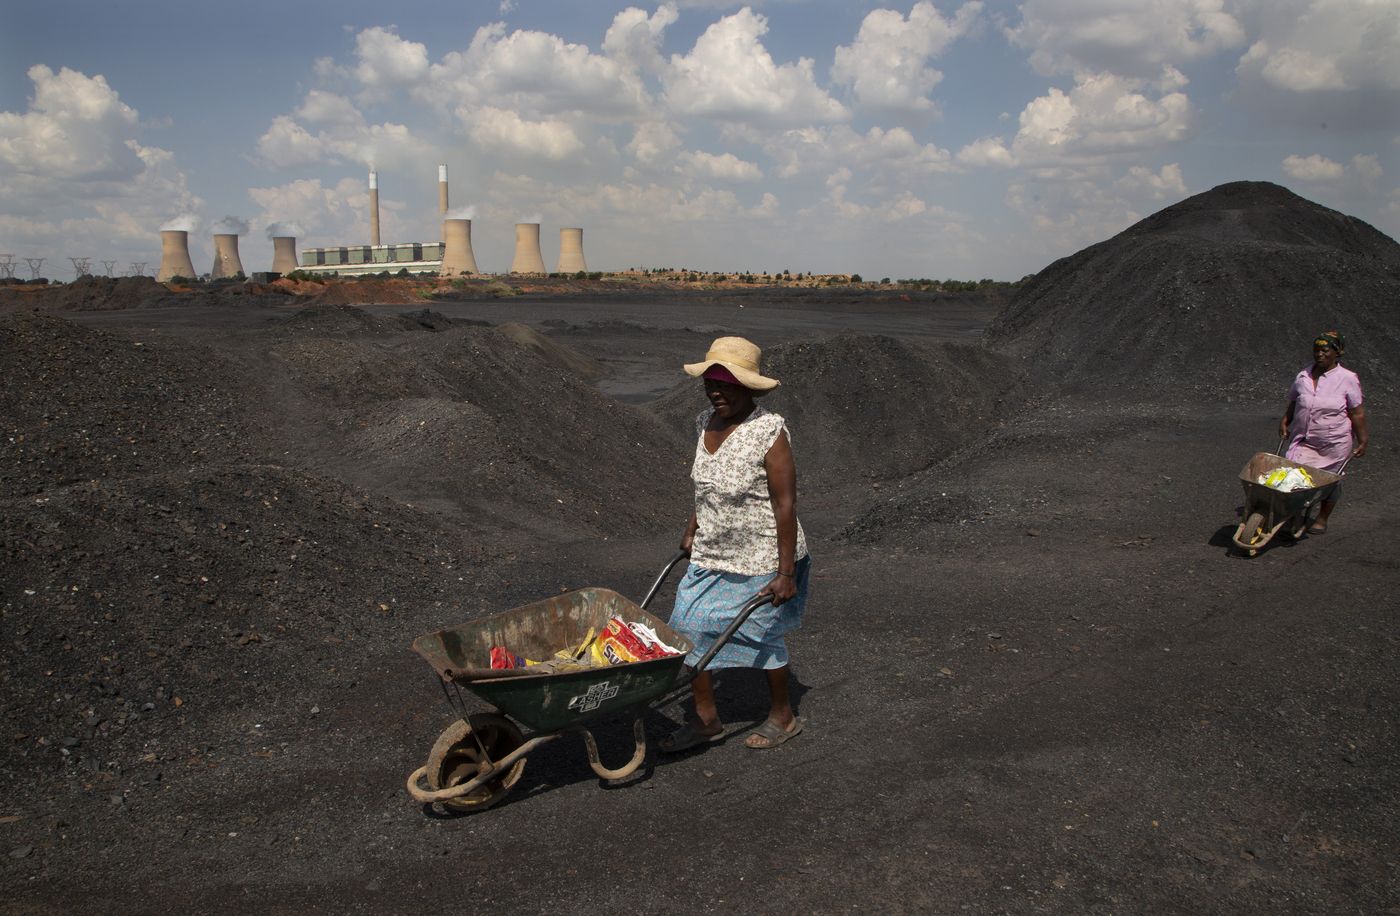 Women at coal-mine dump at the Duvha coal-fired power station in South Africa (2022). 